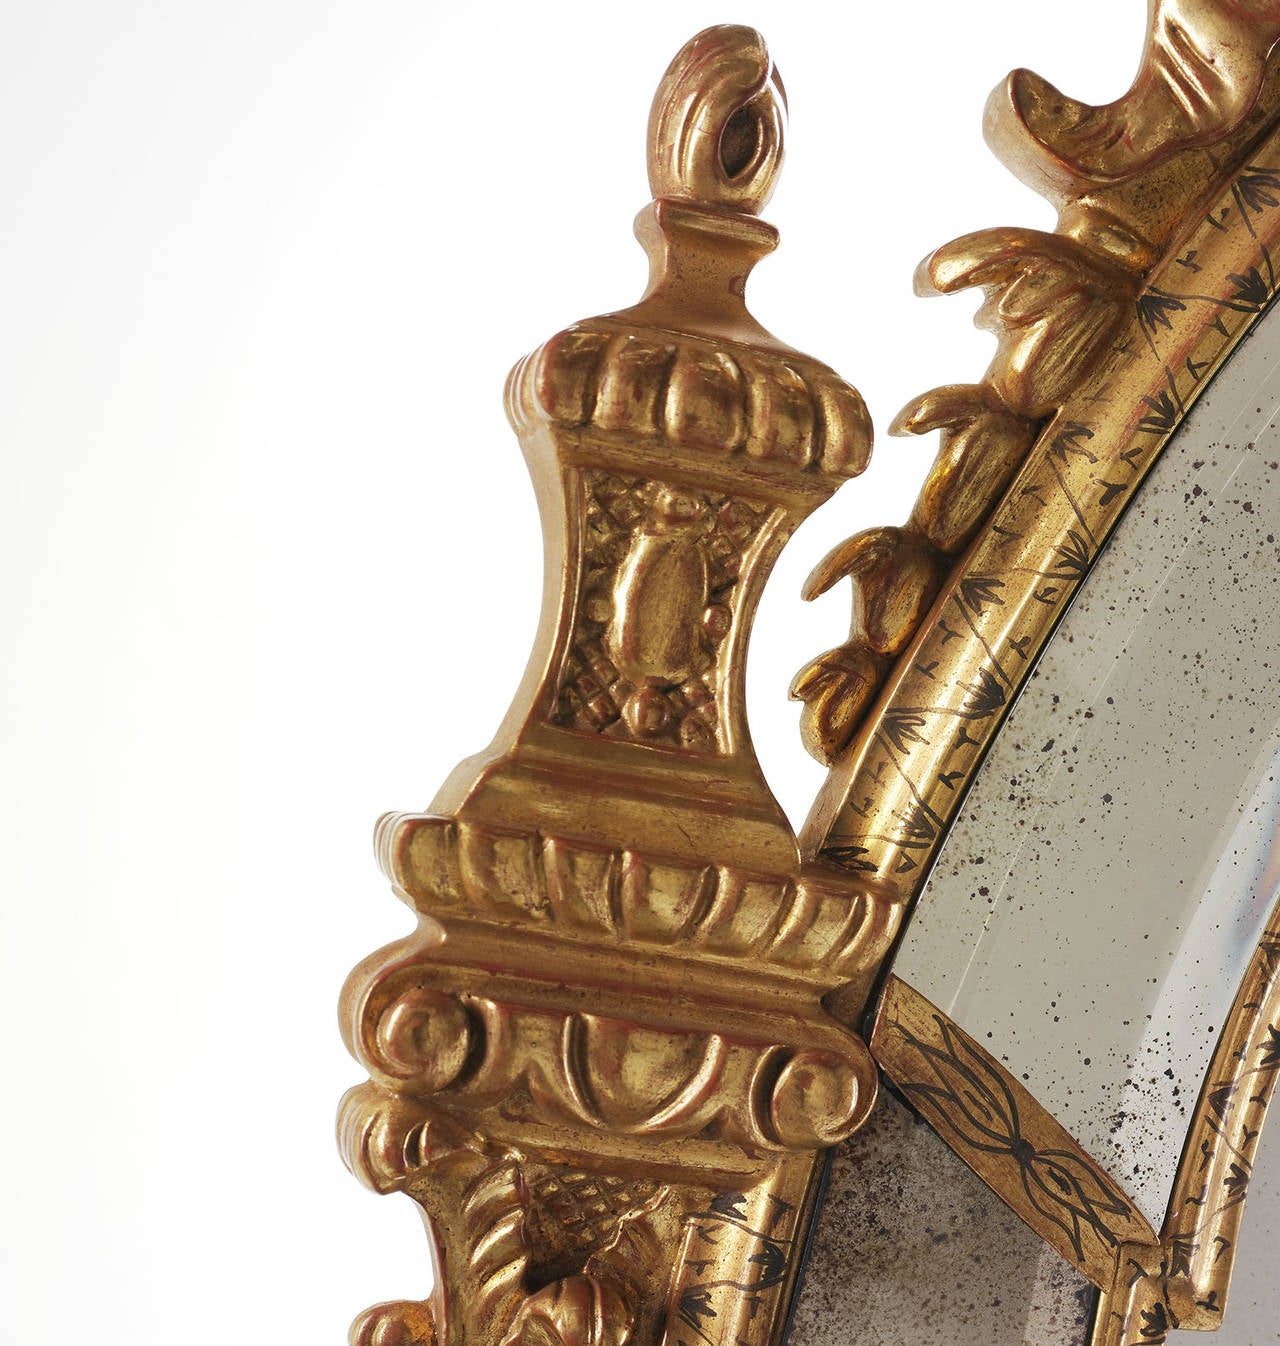 British Stately Homes Wakefield mirror with panels in gold and gold black trim
22-karat gold gilt finish with lightly antiqued mirrored borders, center panels in mirrored antique finish. Border pieces in bevel mirror.
Shaped beveled mirrored panel